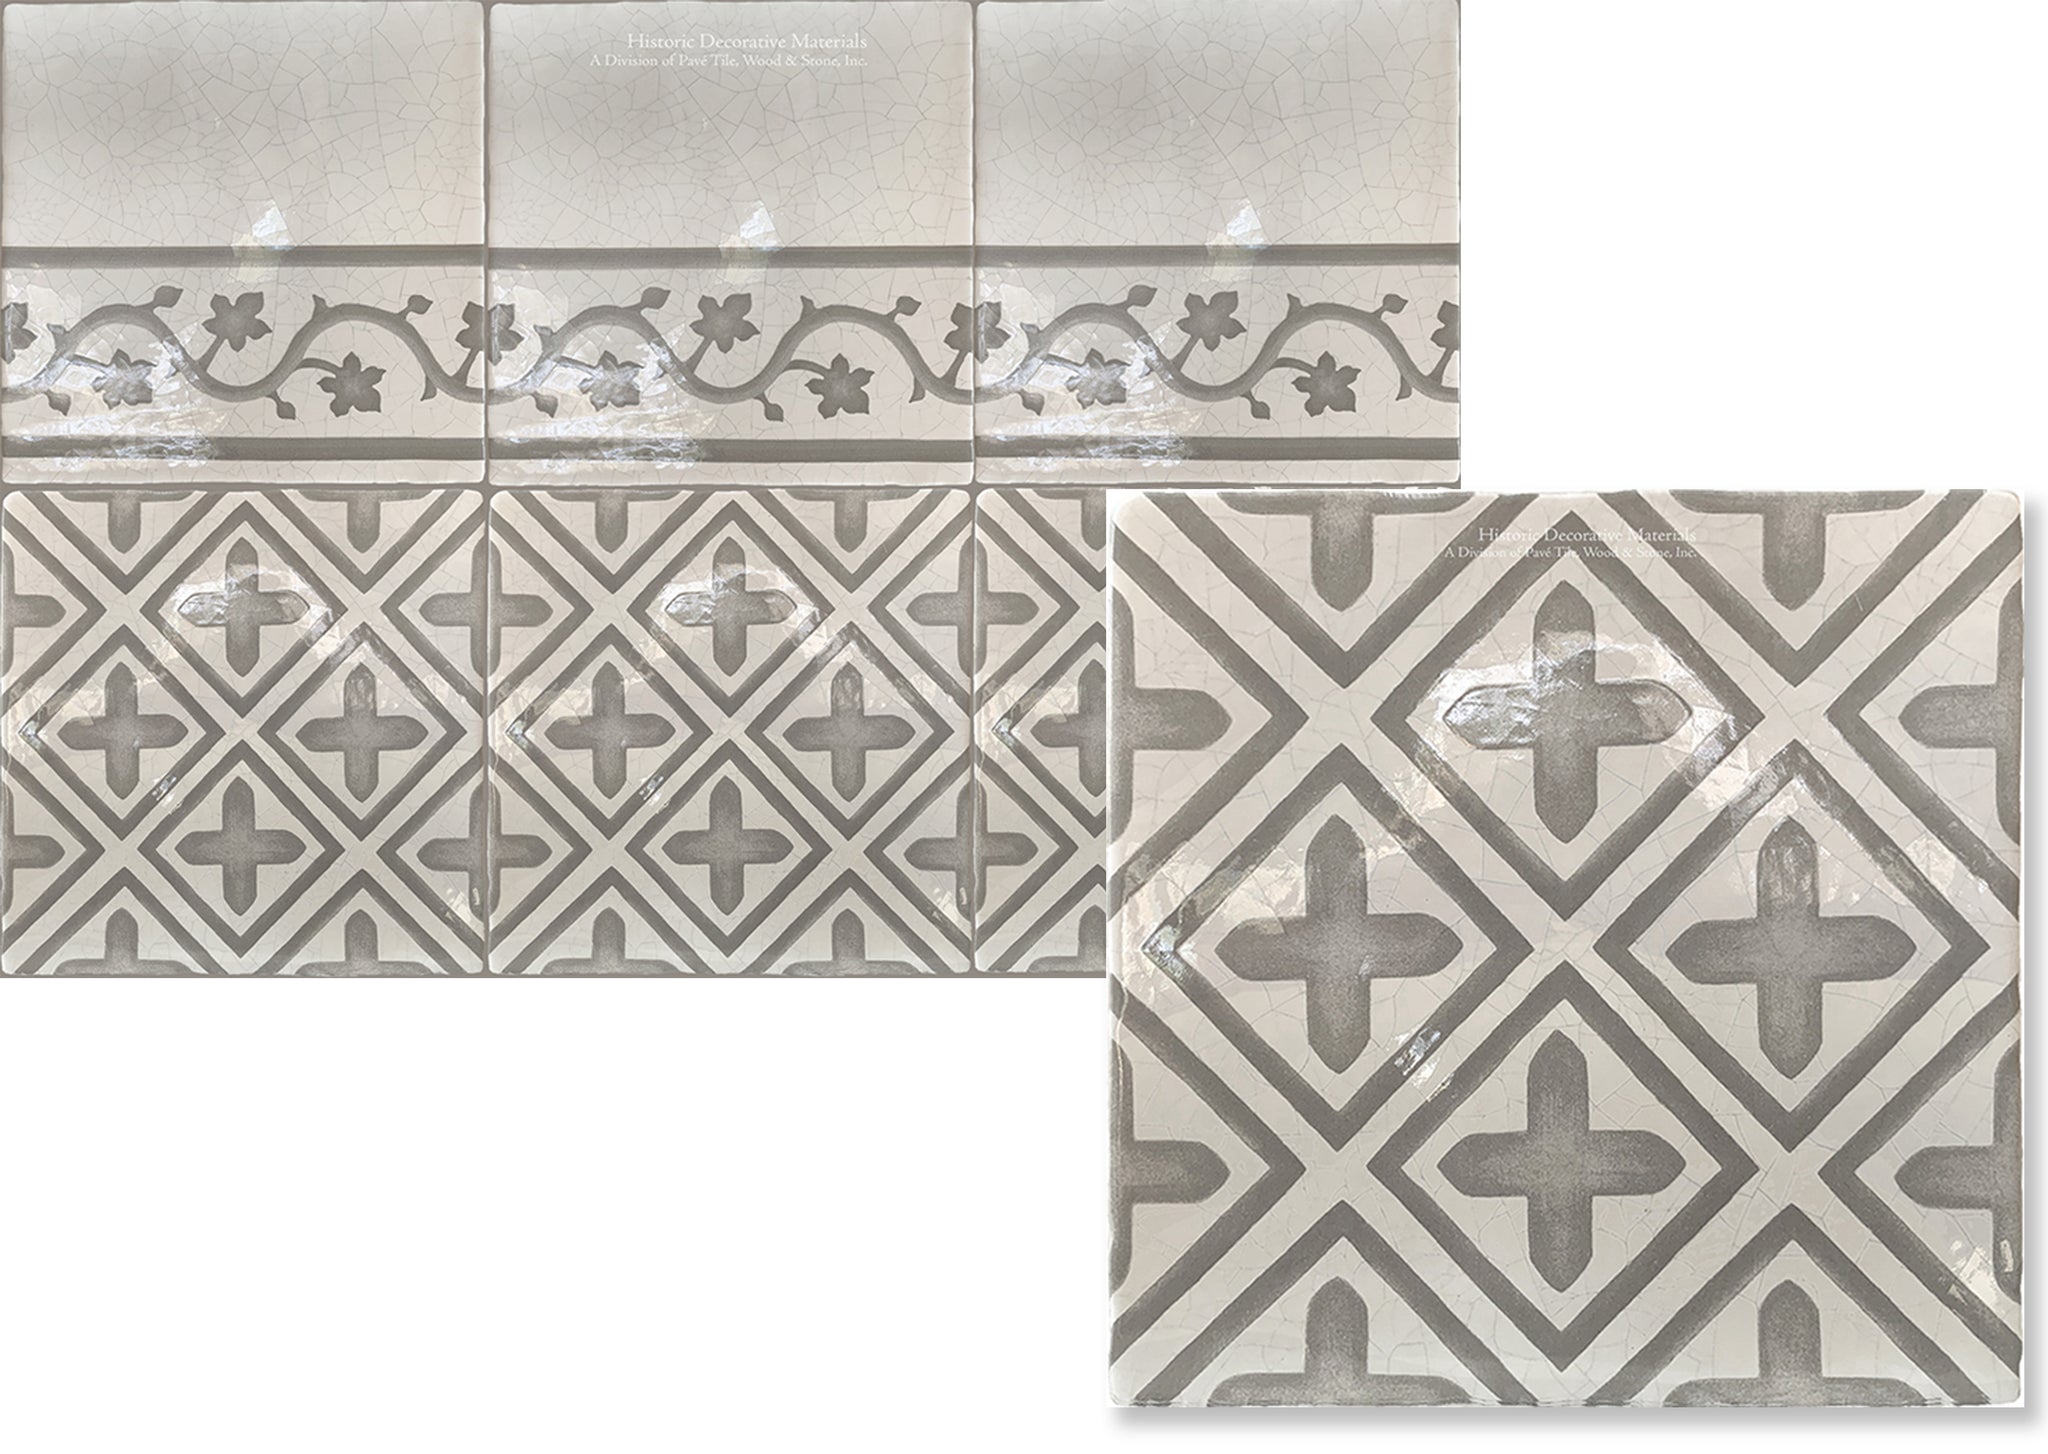 Historic decorative patterned wall tiles for kitchen back splash, bathroom walls, powder room, fireplace surround that interior designers choose for farmhouse, luxury, and old world interiors